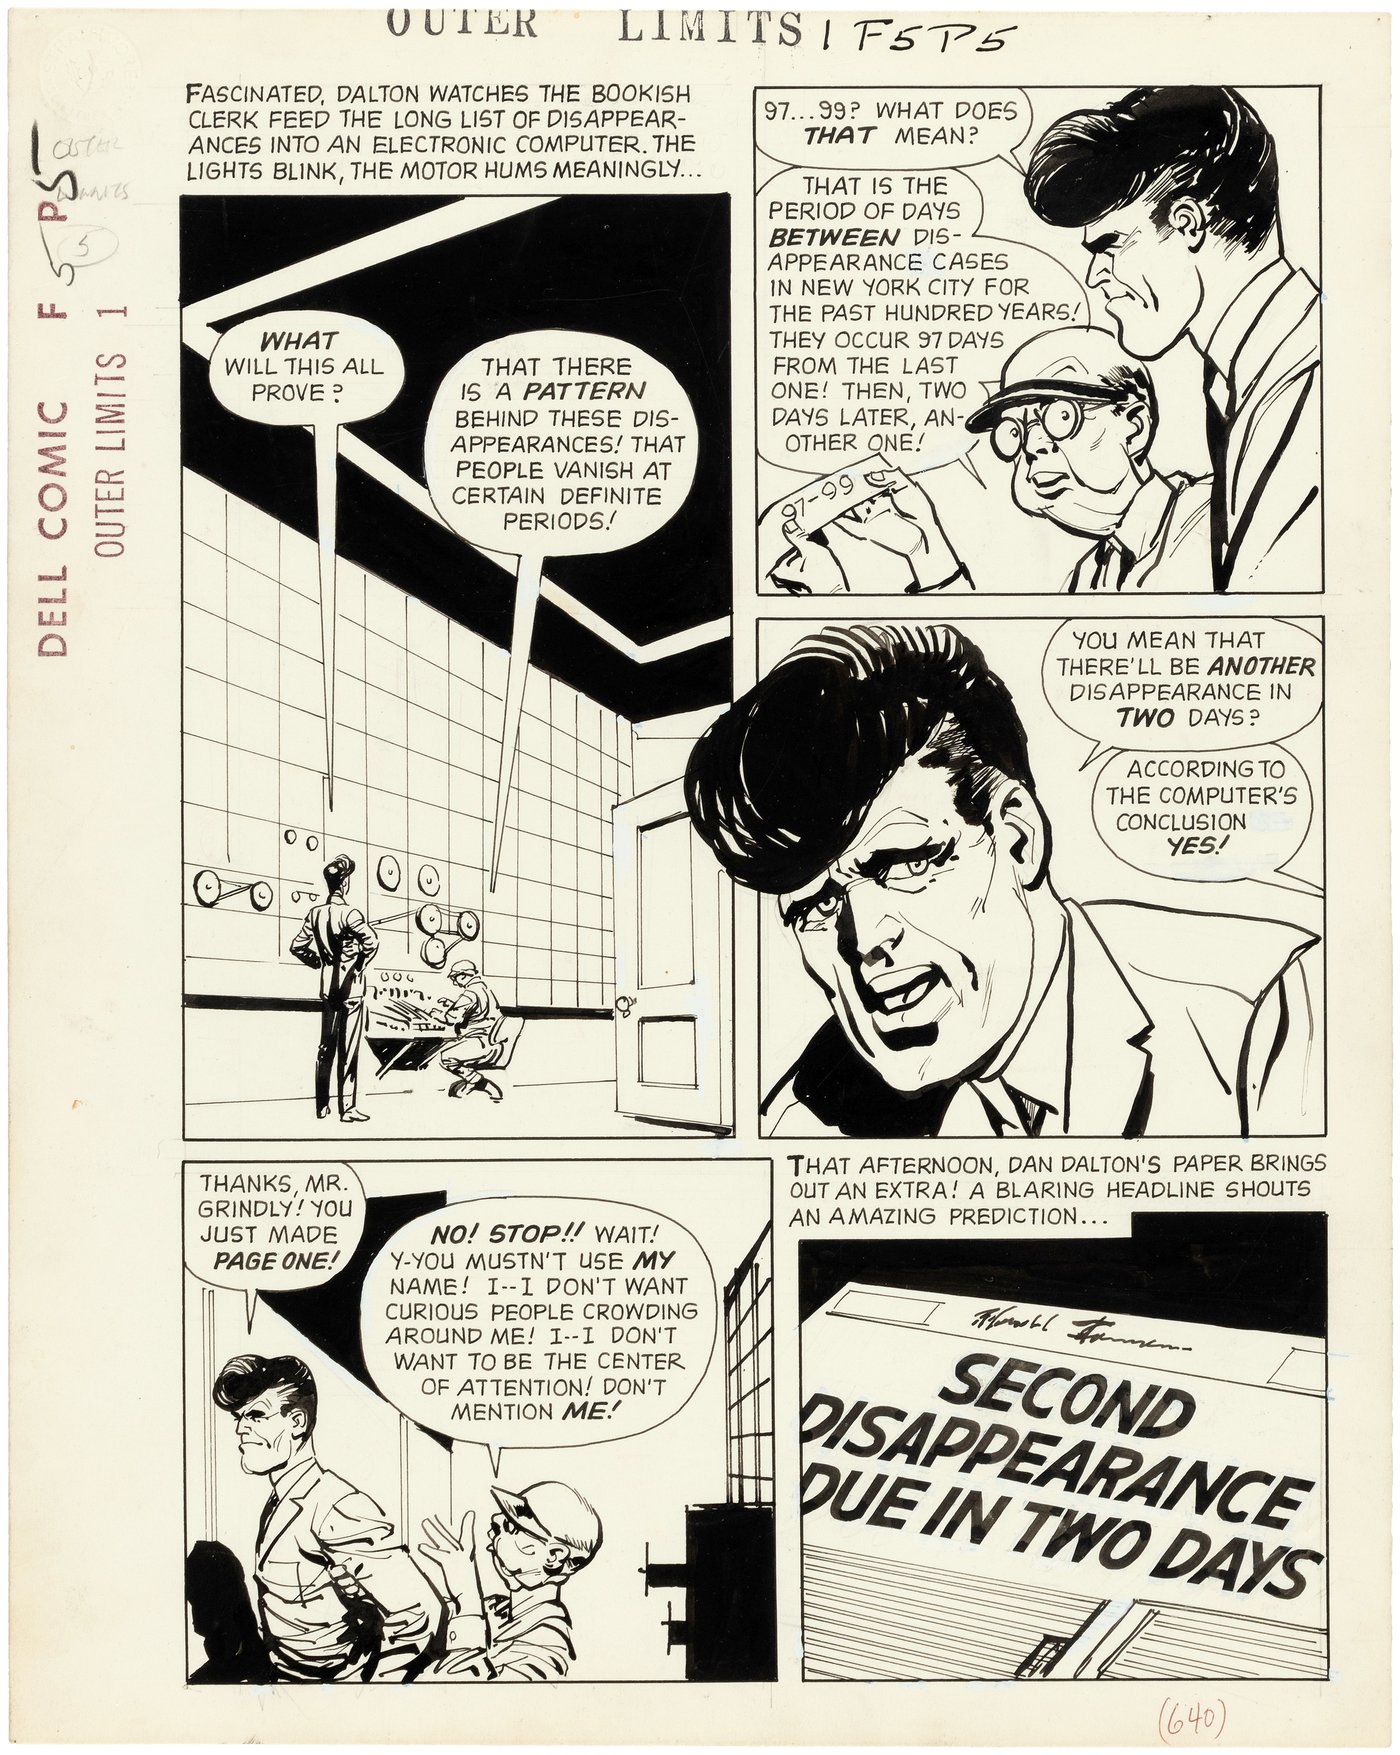 Hake's - OUTER LIMITS #1 COMPLETE COMIC BOOK ORIGINAL ART BY JACK SPARLING.